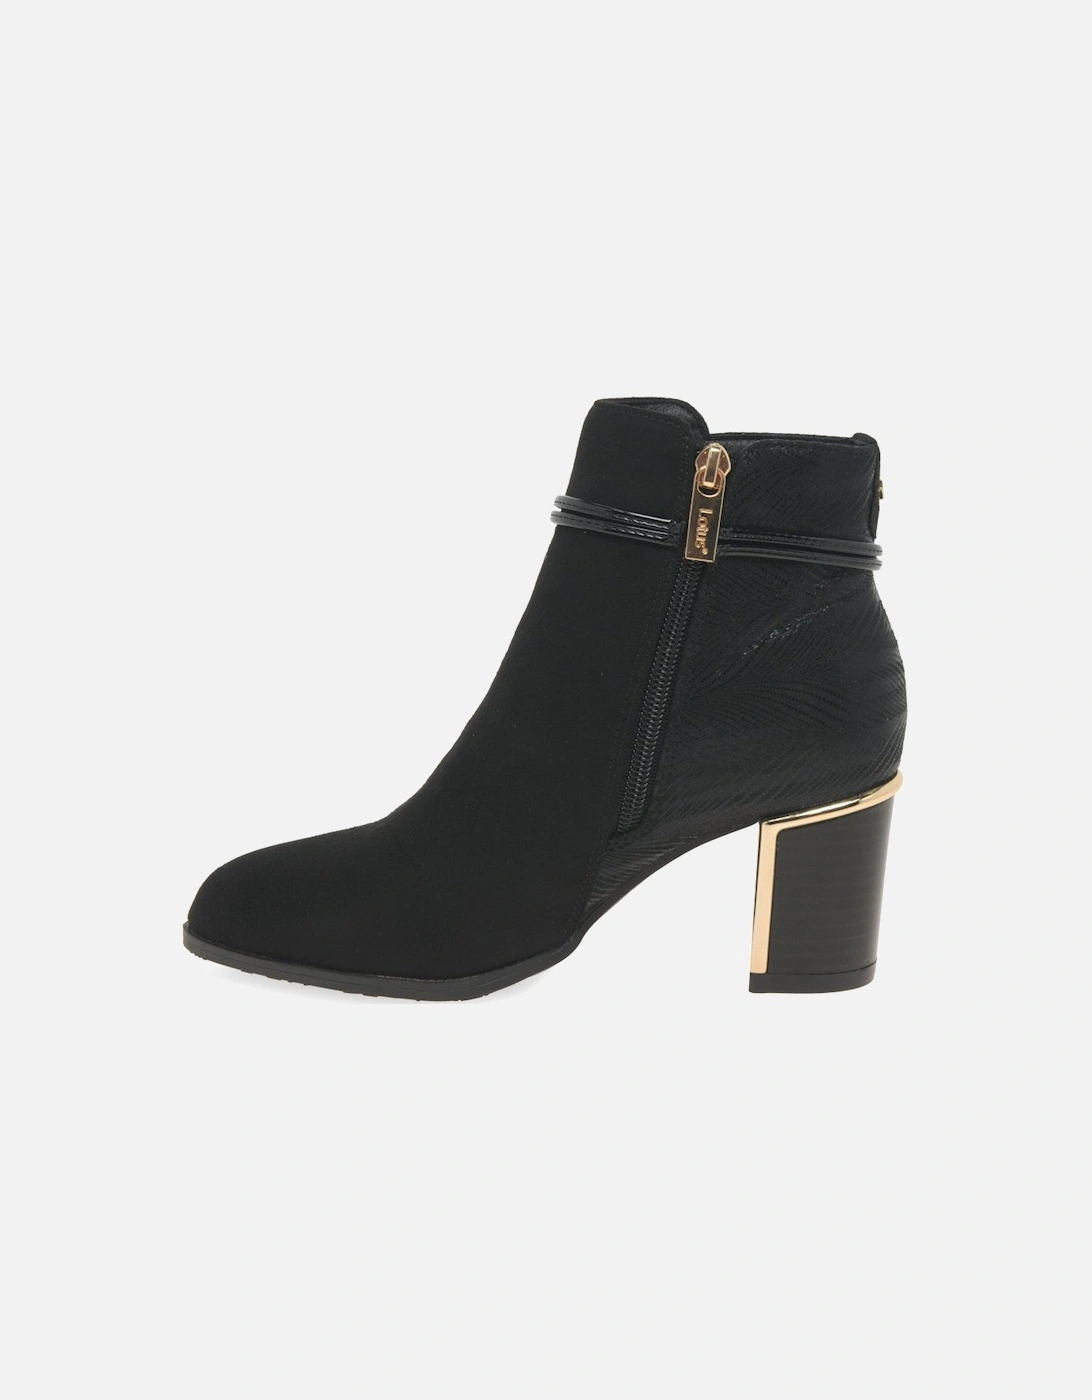 Autumn Womens Ankle Boots